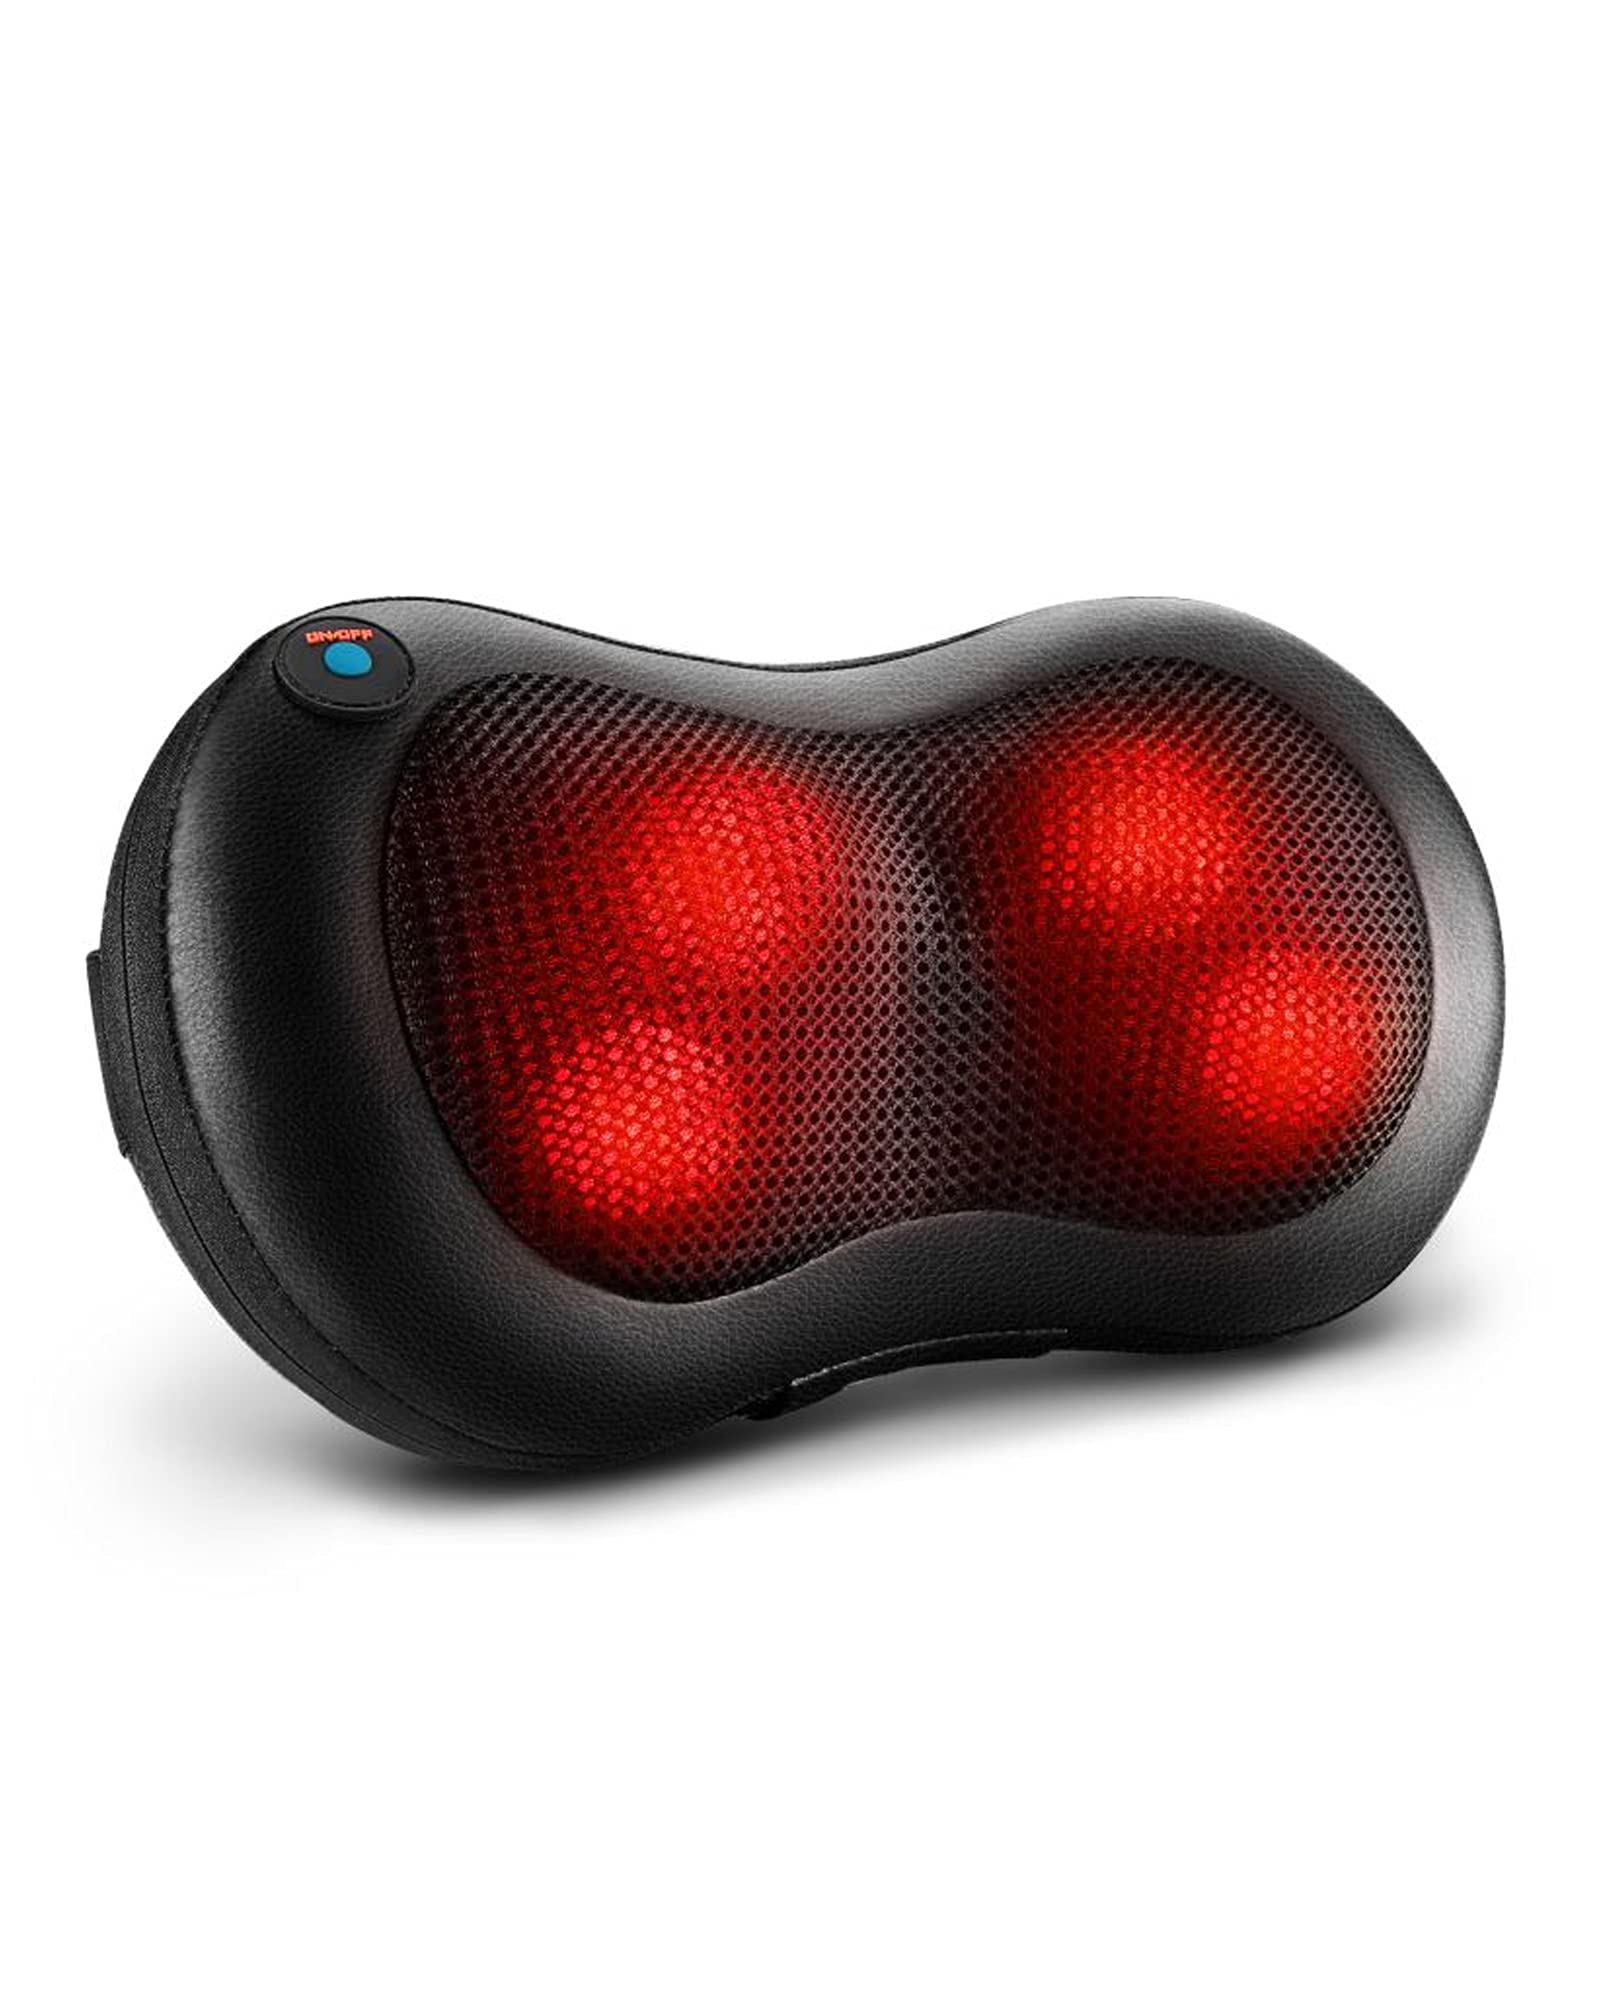 Naipo Shiatsu Kneading Massager Neck & Shoulder Massager with Heat review -  The Gadgeteer